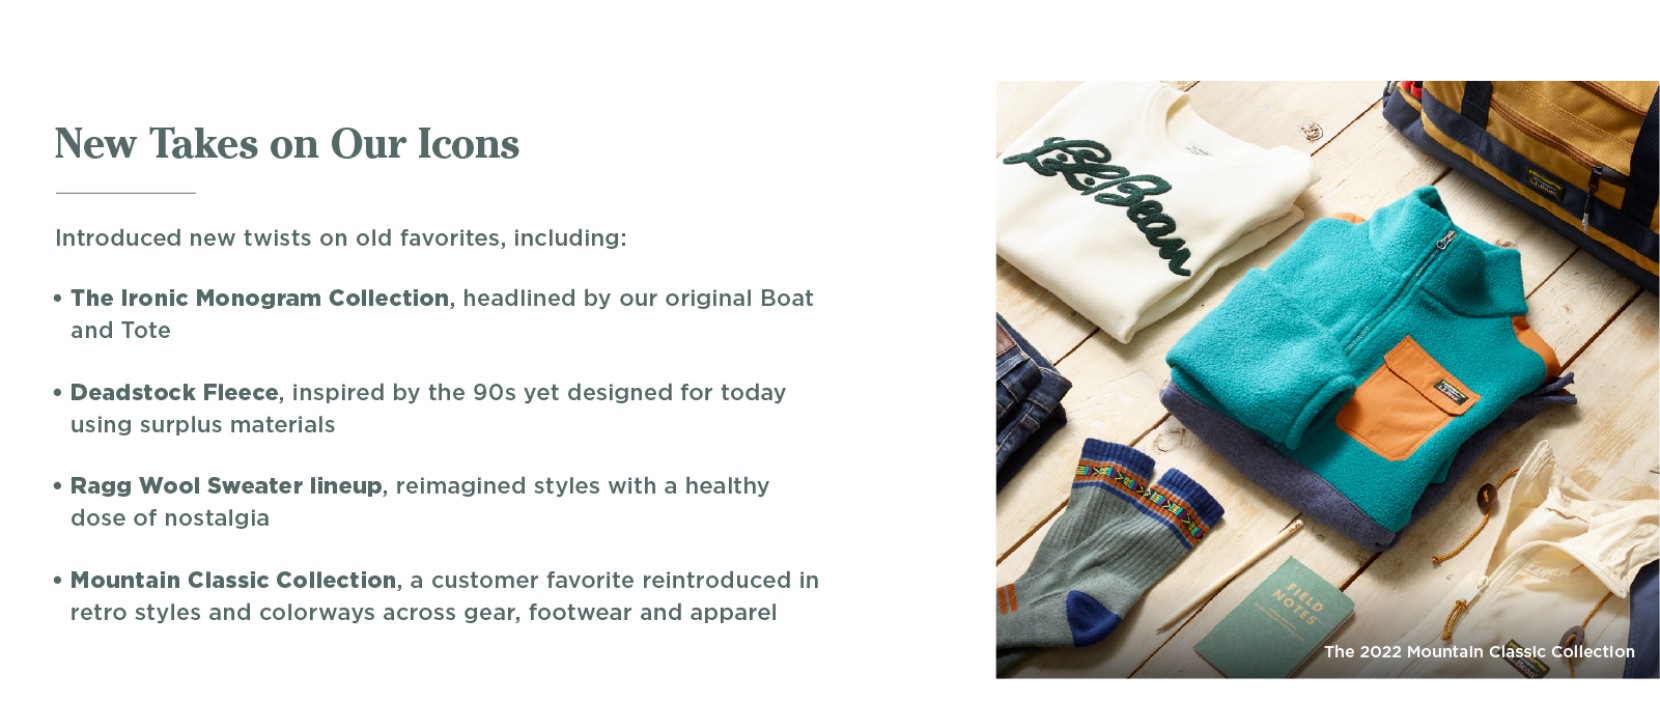 The Ironic Monogram Collection at L.L.Bean